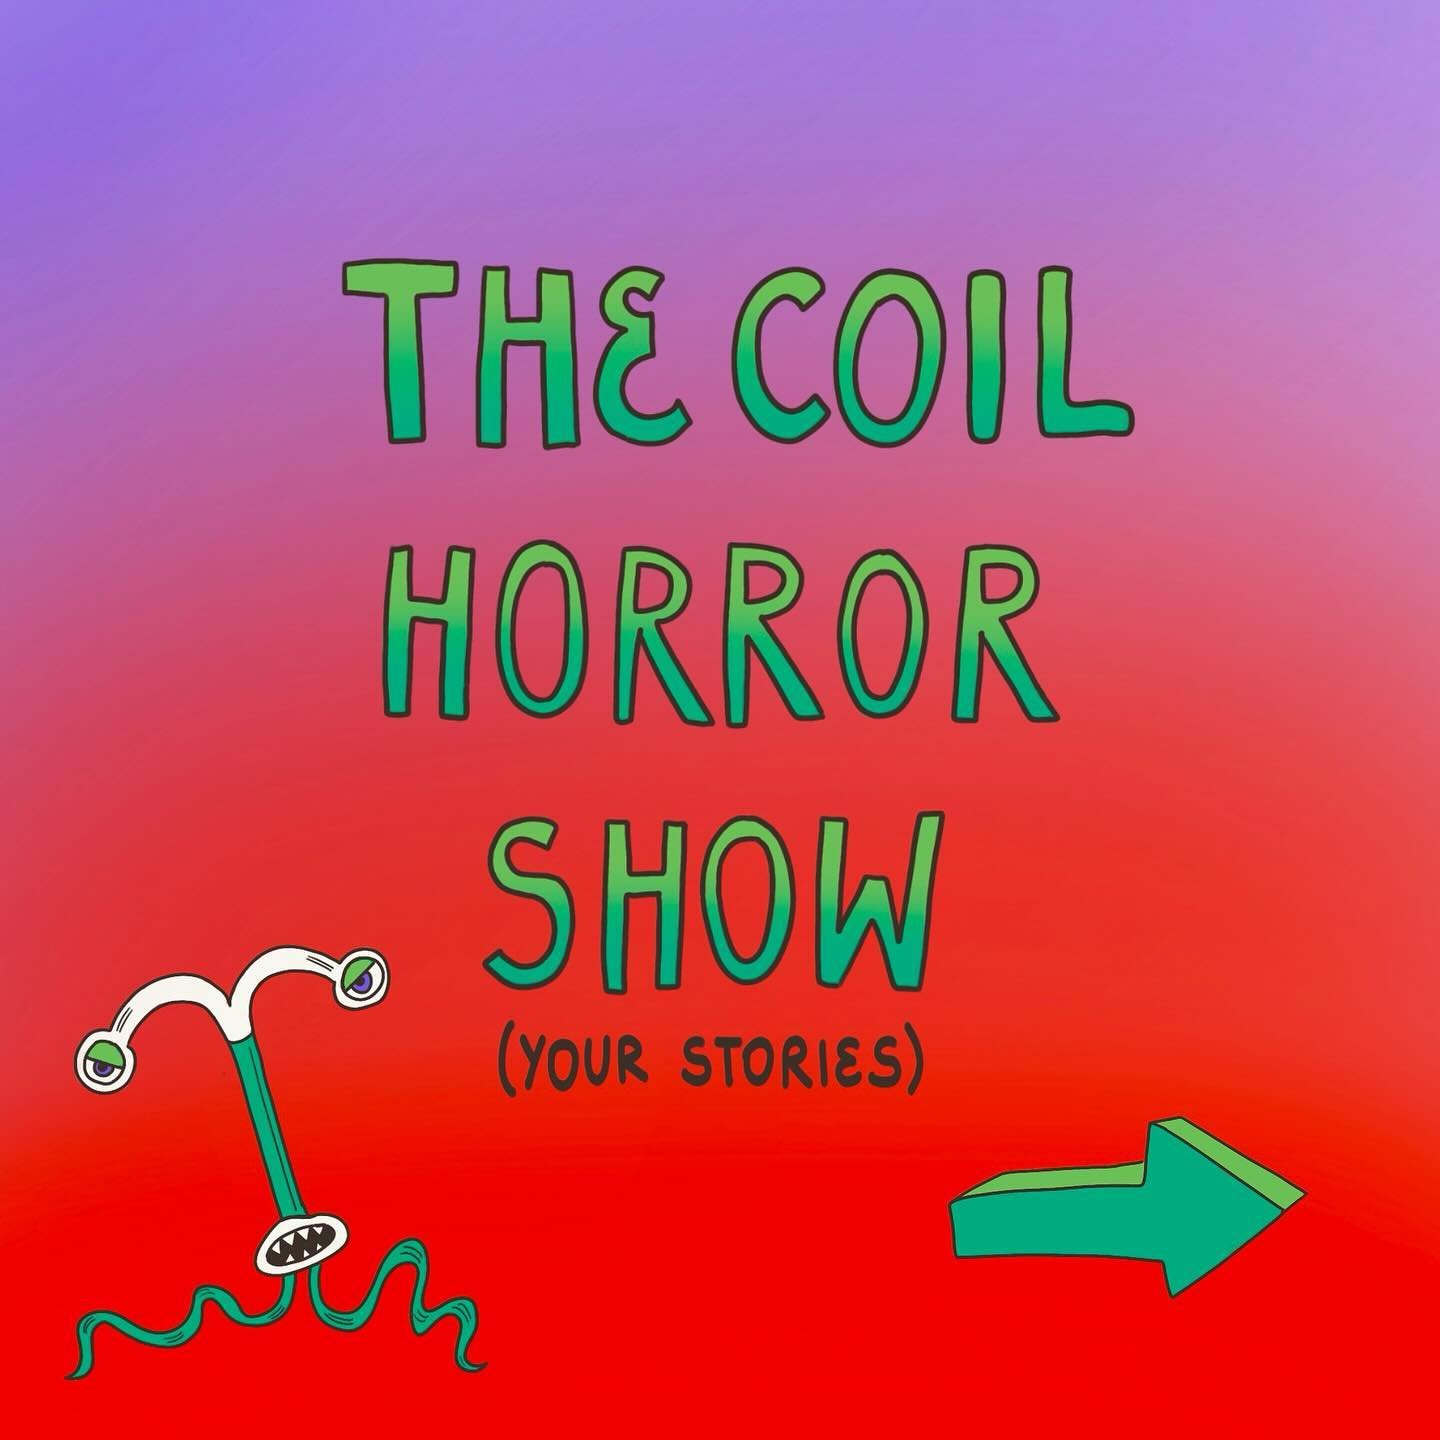 The Coil Horror Show is here, with your stories. 

To everyone who shared their story - thank you and I&rsquo;m sorry that you had to go through it. What an absolute 💩 show. 

#iud #coil #contraception #birthcontrol #womenshealth #reproductivehealth